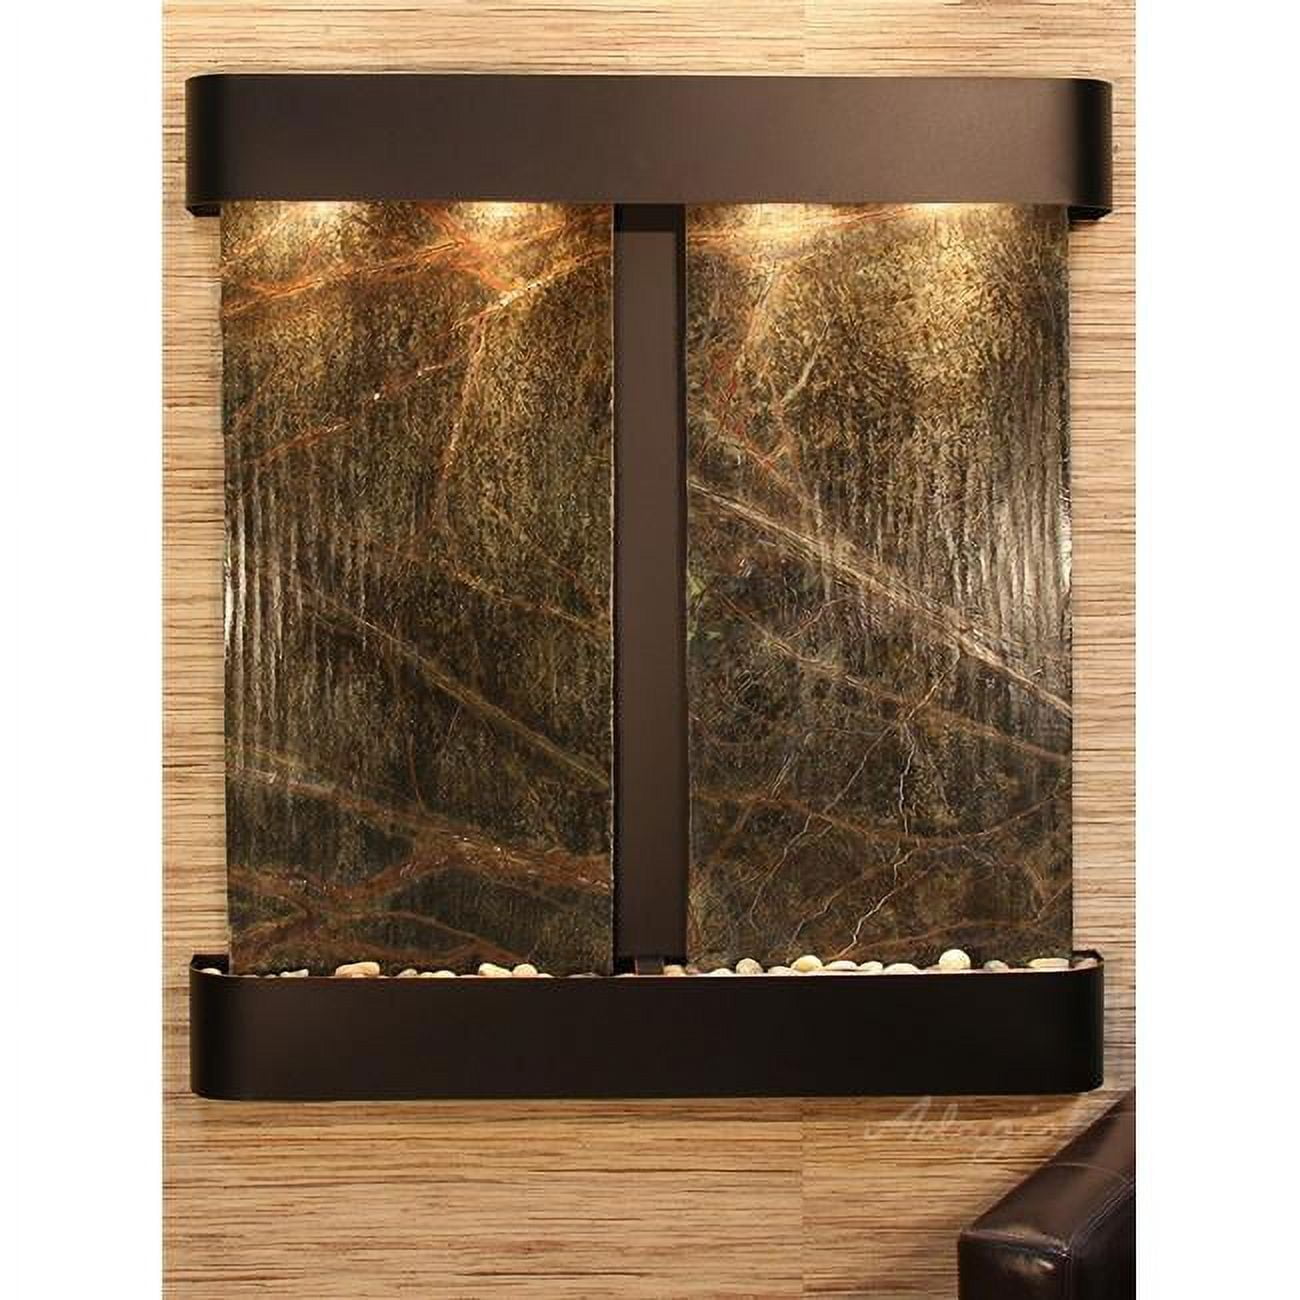 Picture of Adagio AFR1505 Aspen Falls Round Wall Fountain - Blackened Copper-Green Marble